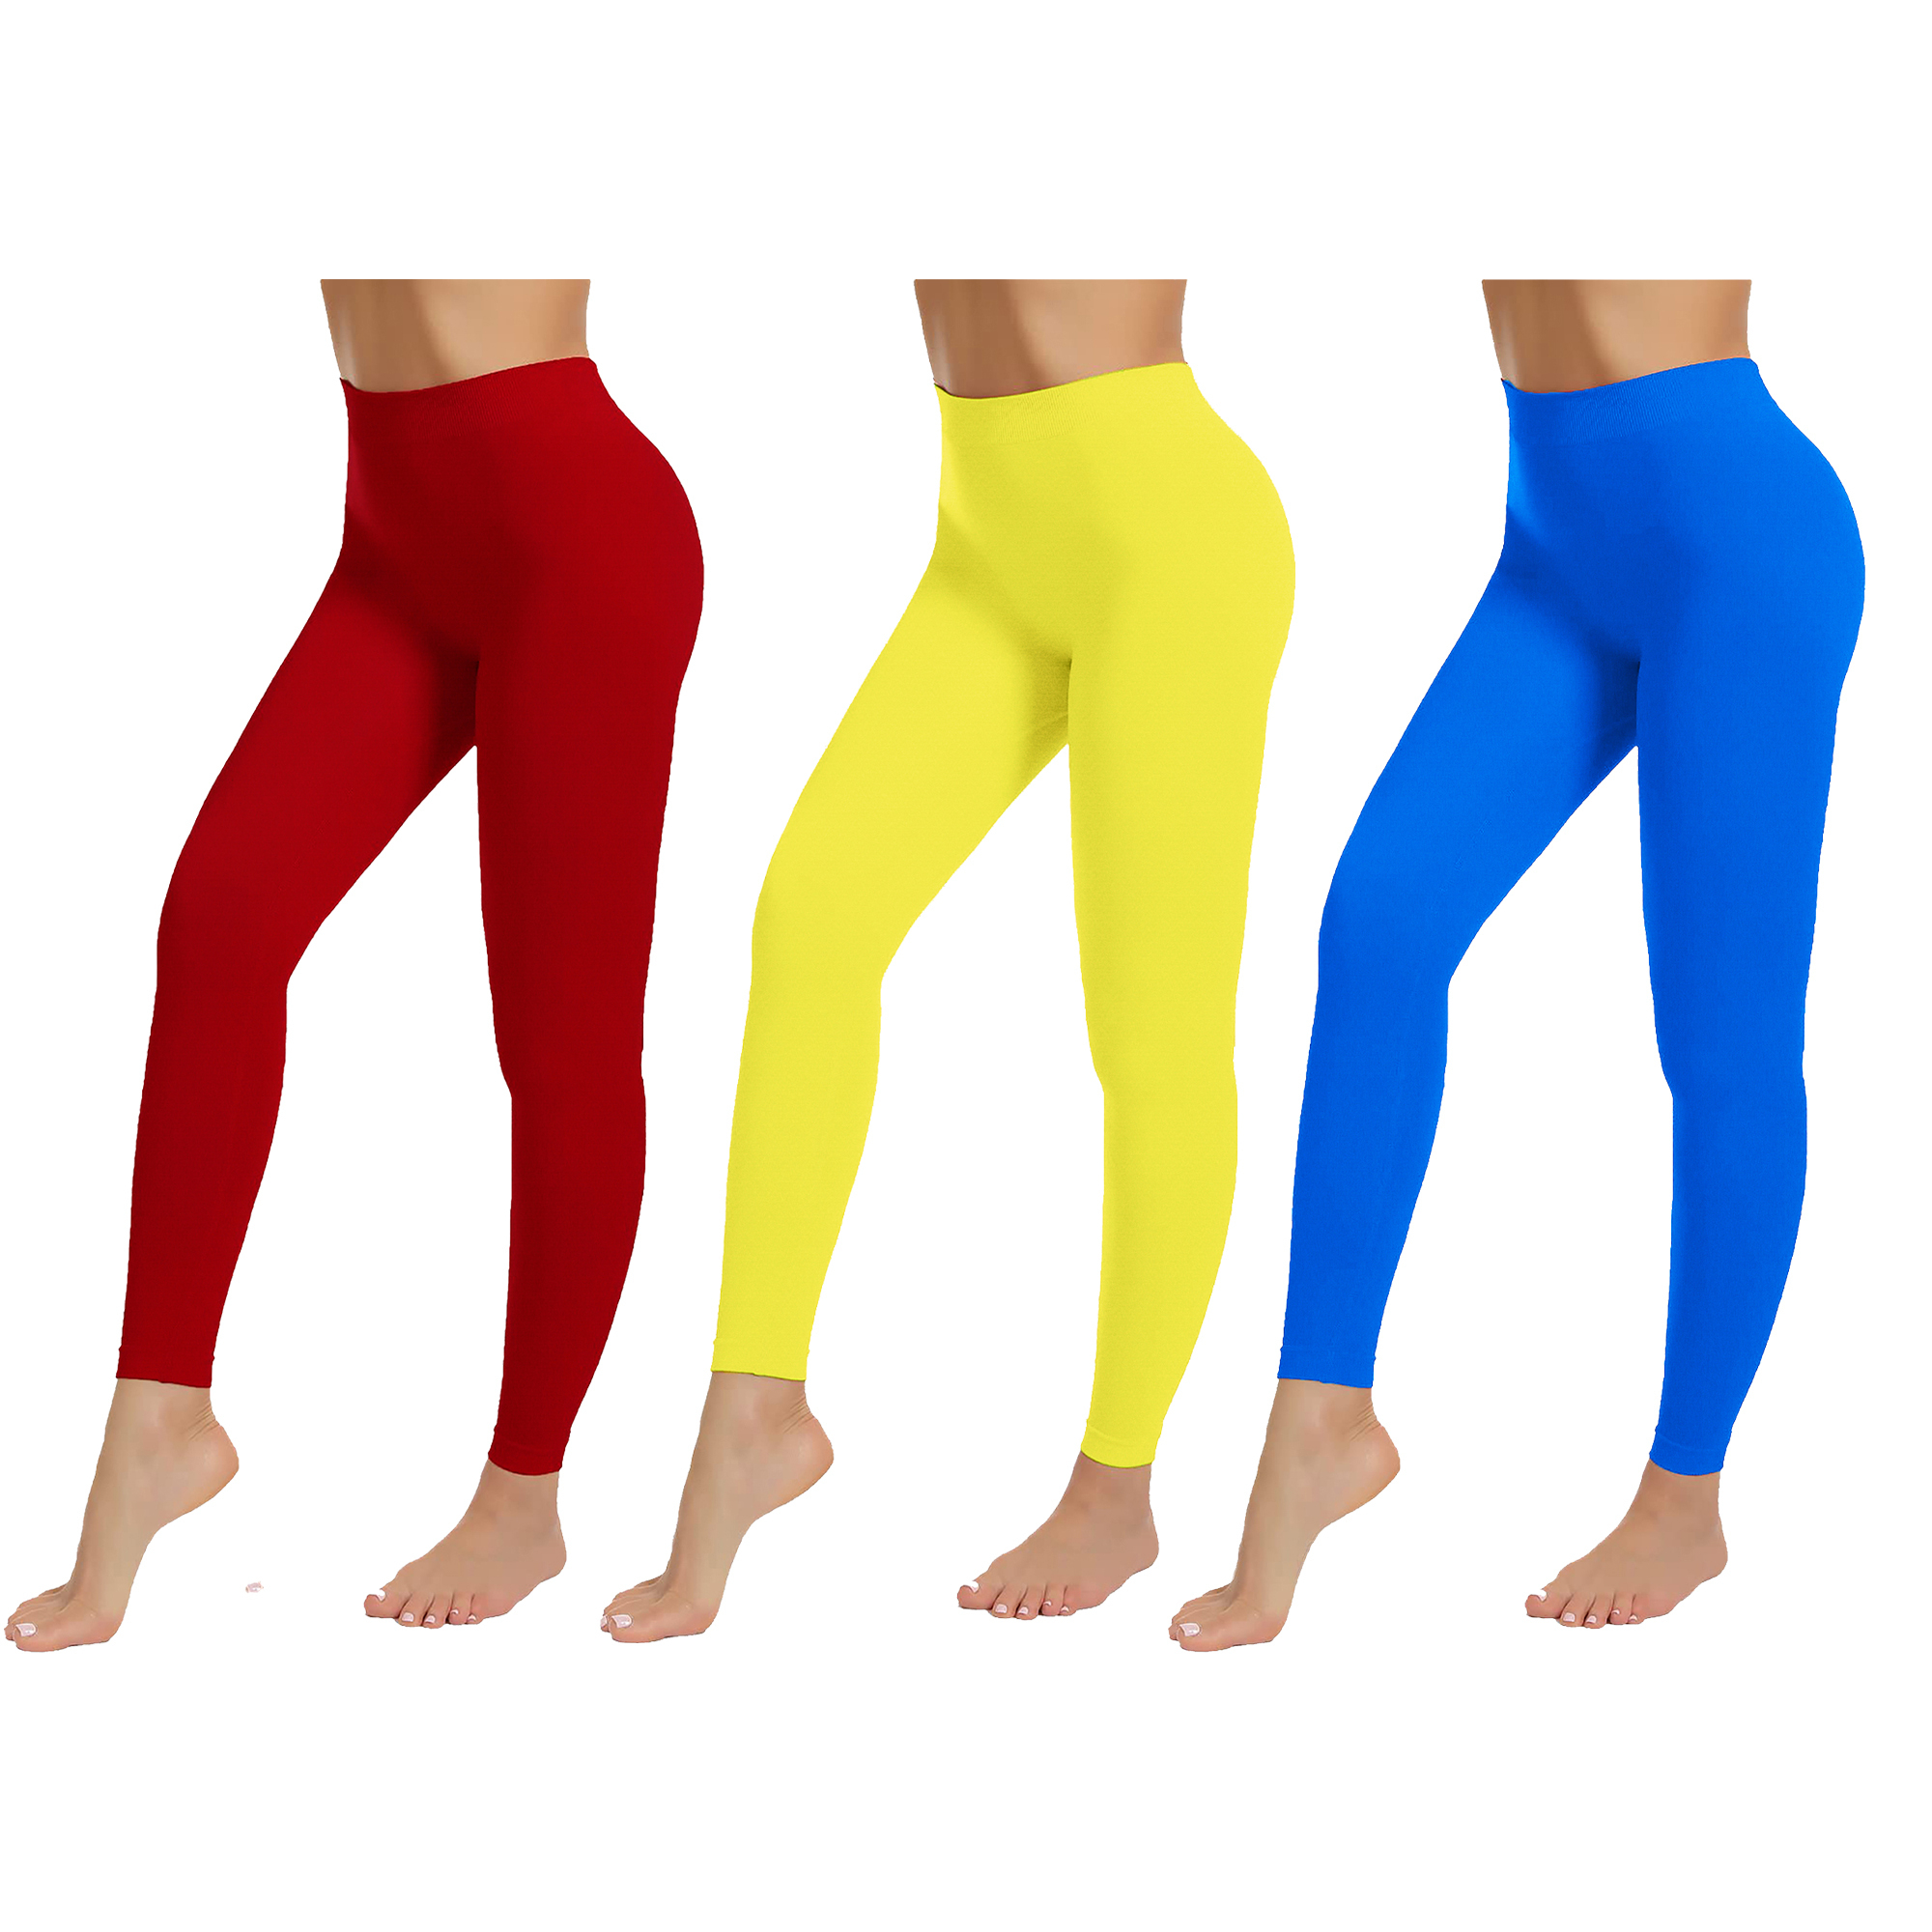 3-Pack: Women's High-Waist Ultra-Soft Stretchy Solid Fitness Yoga Leggings Pants - YELLOW, M